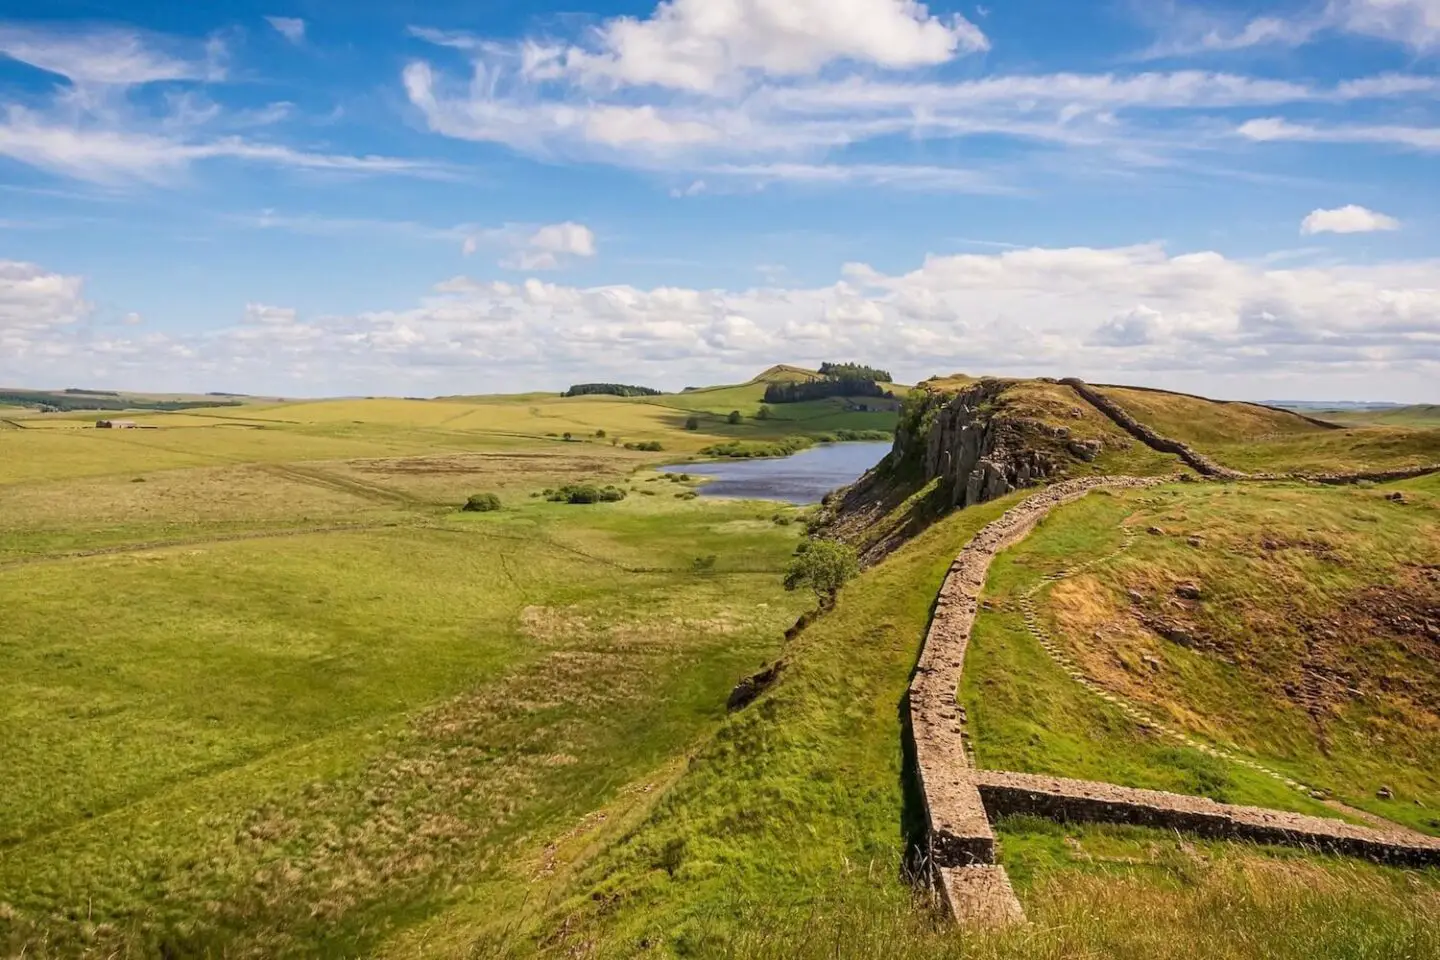 Hadrian's Wall in the countryside on a clear and bright day